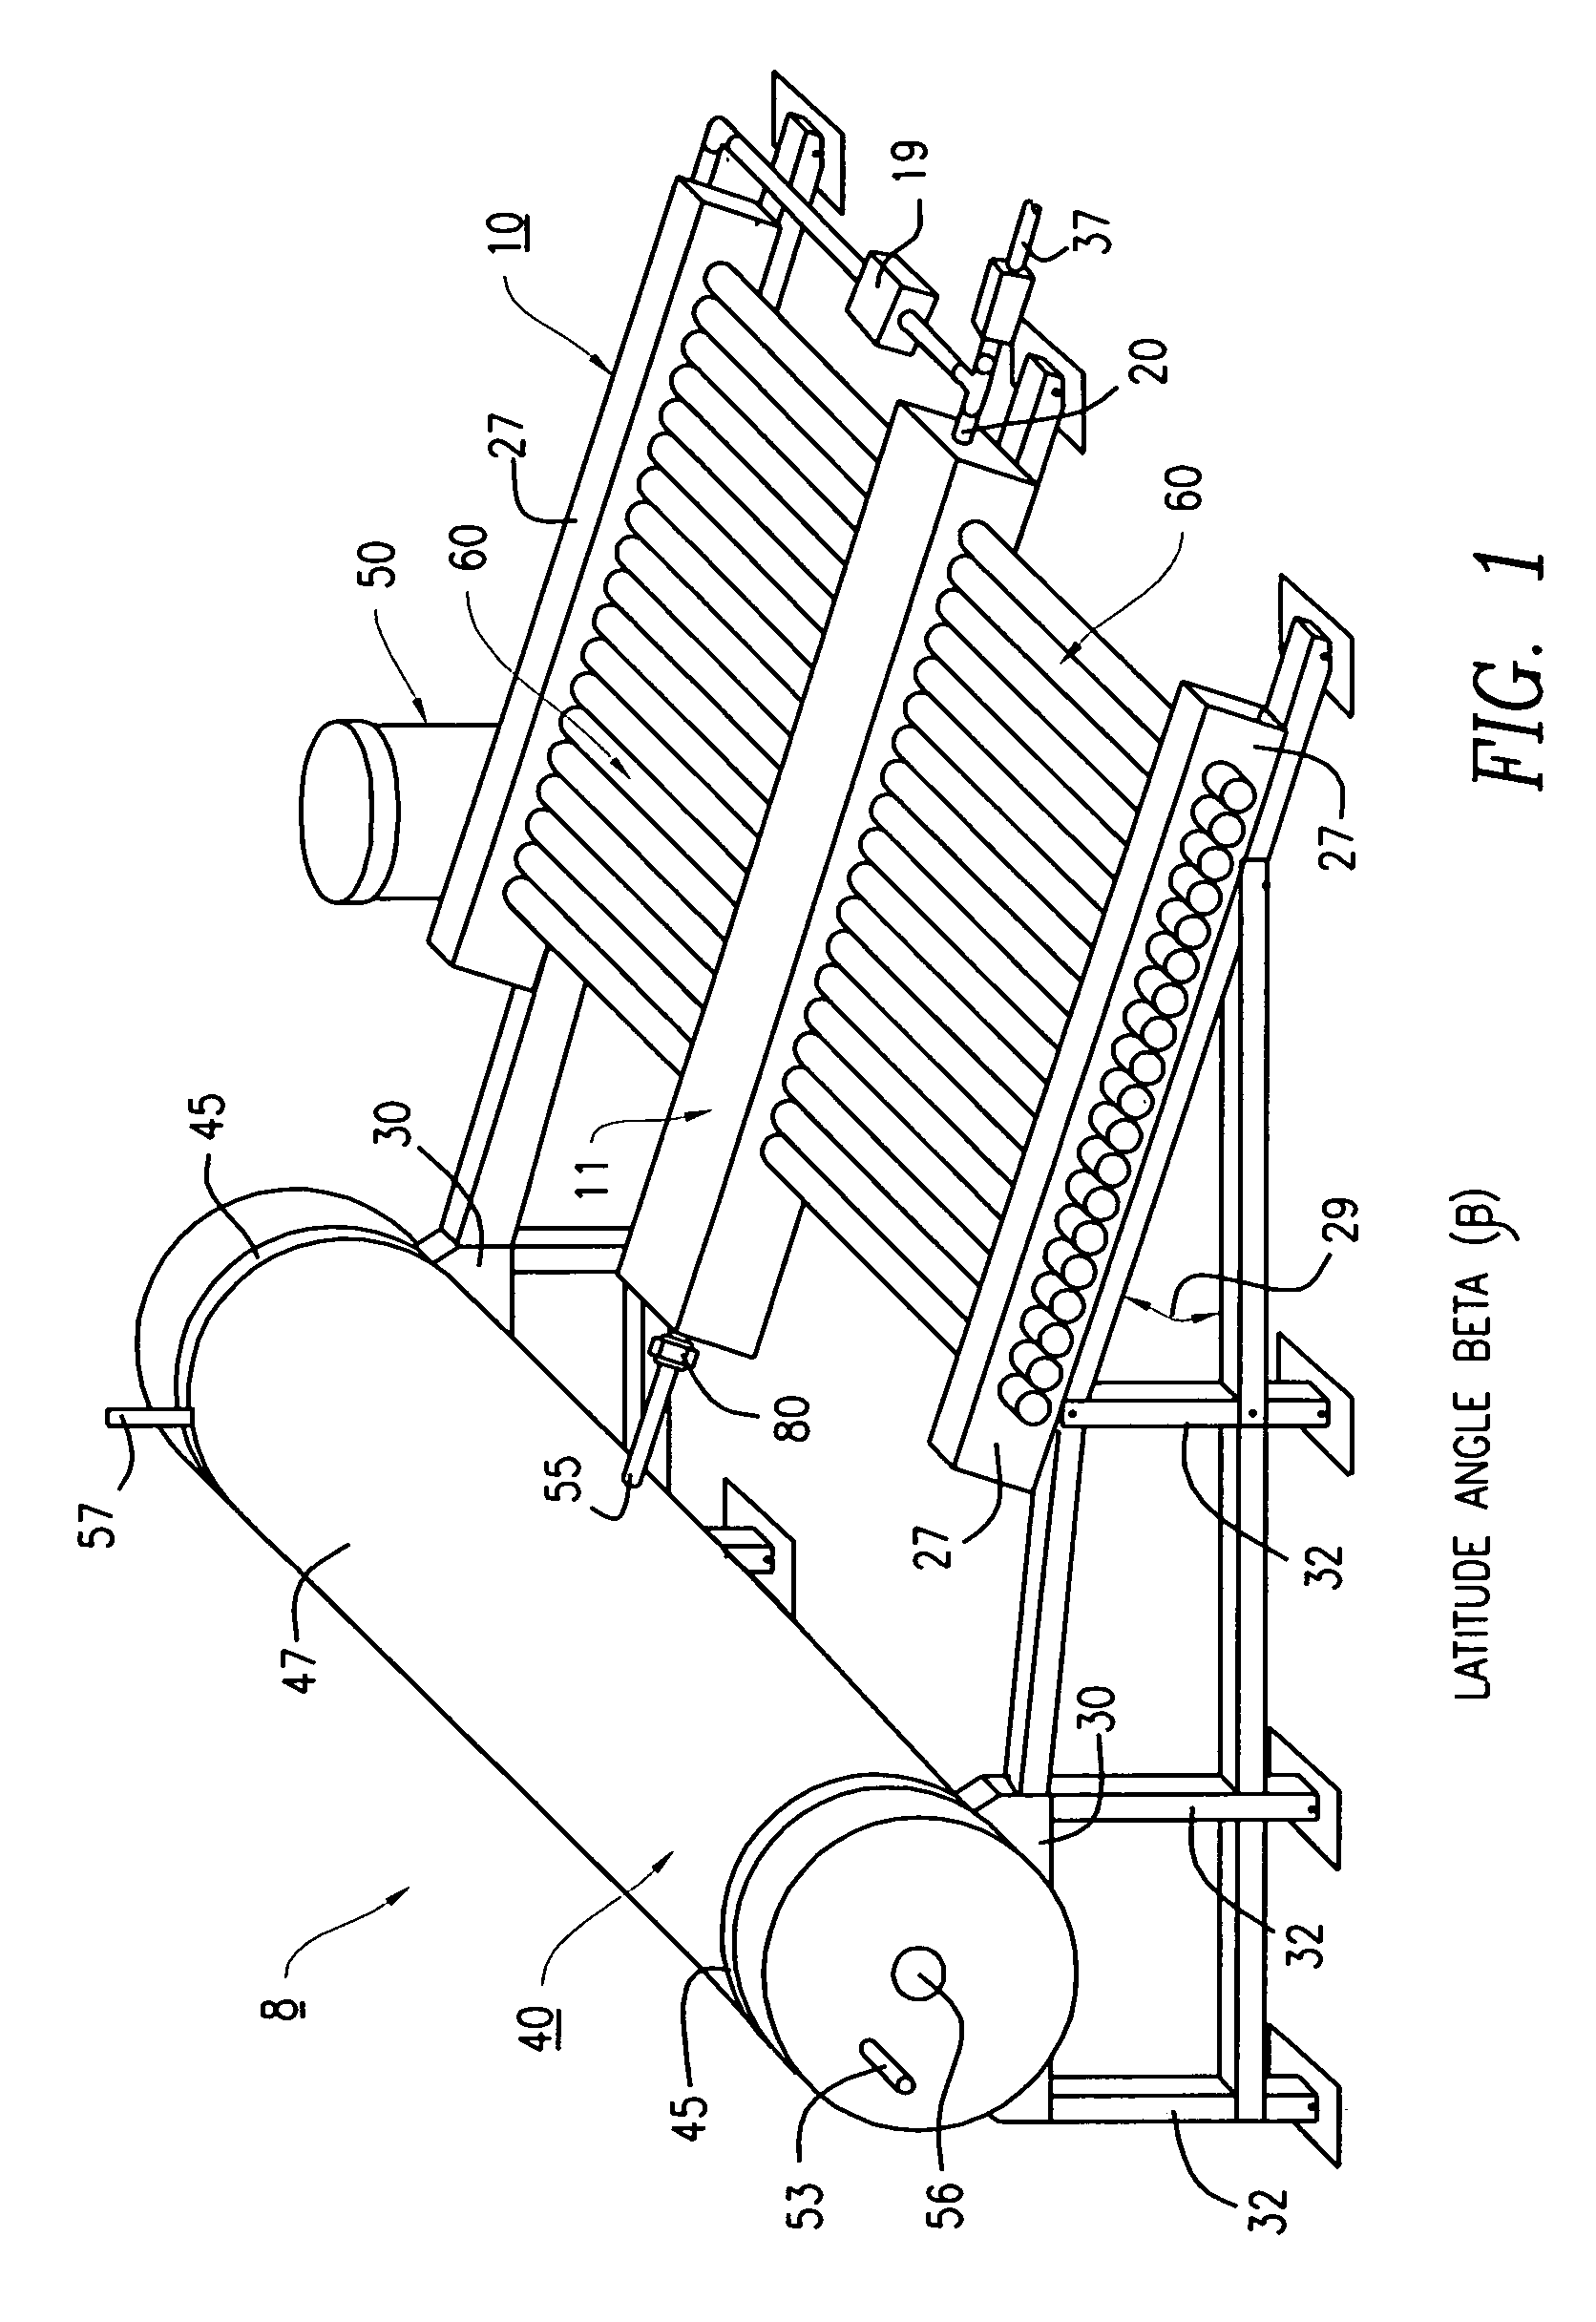 Integrated solar liquid heater, distiller and pasteurizer system